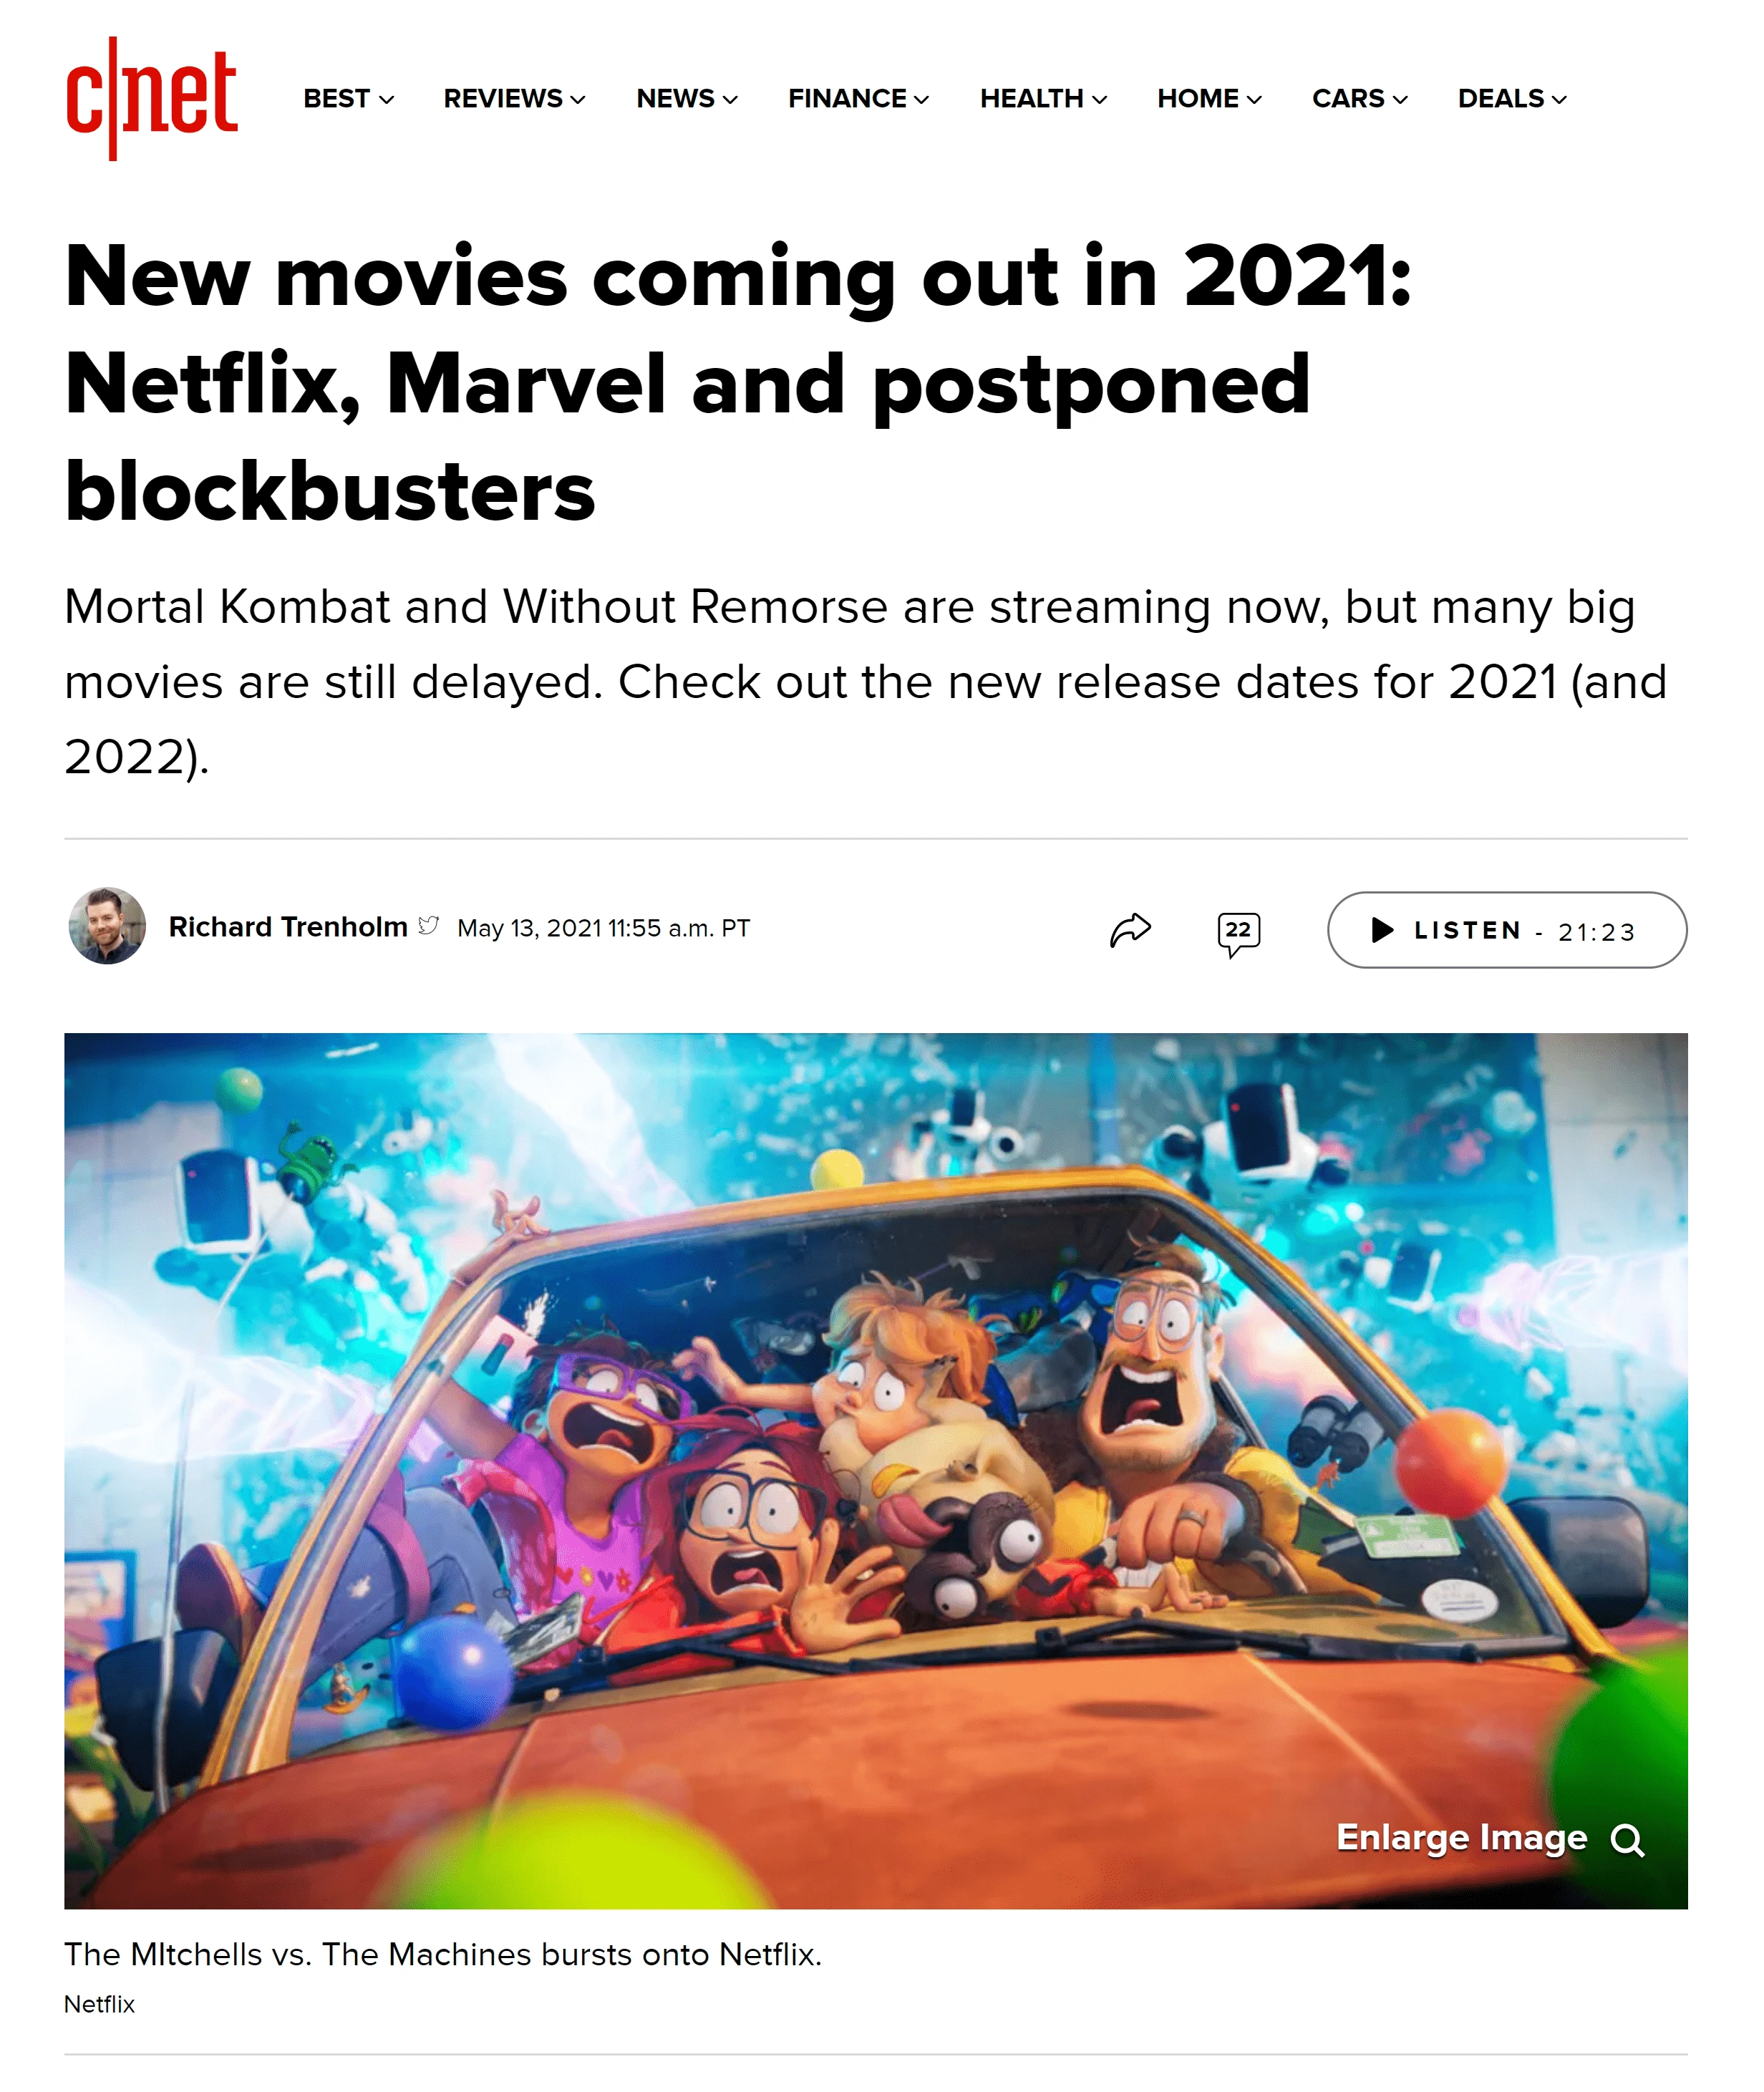 new-movies-coming-out-in-2021-min.png